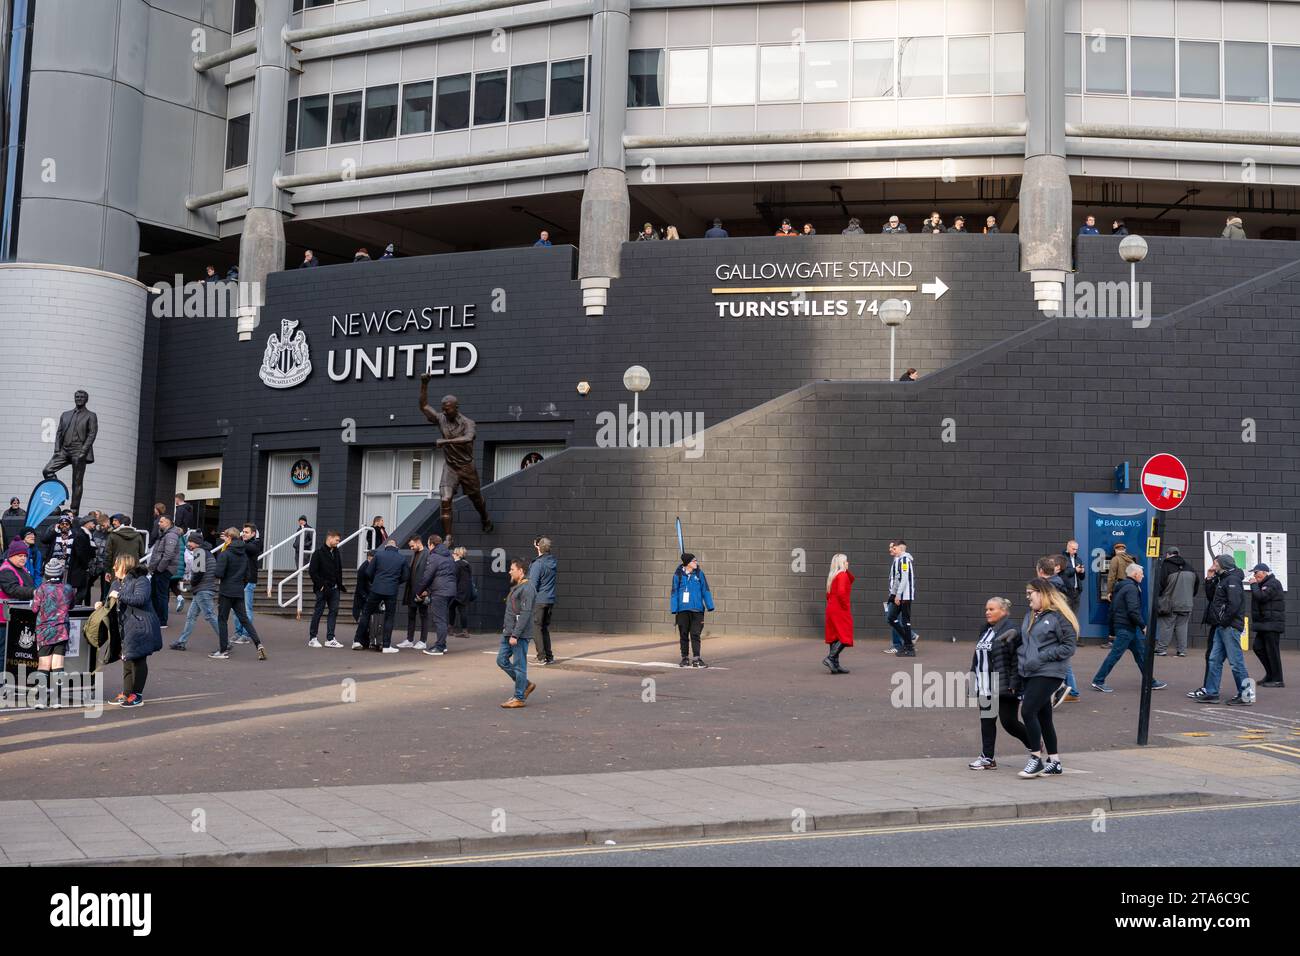 Fans arrive at St James' Park stadium, home ground of Newcastle United Football Club, in Newcastle upon Tyne, UK Stock Photo